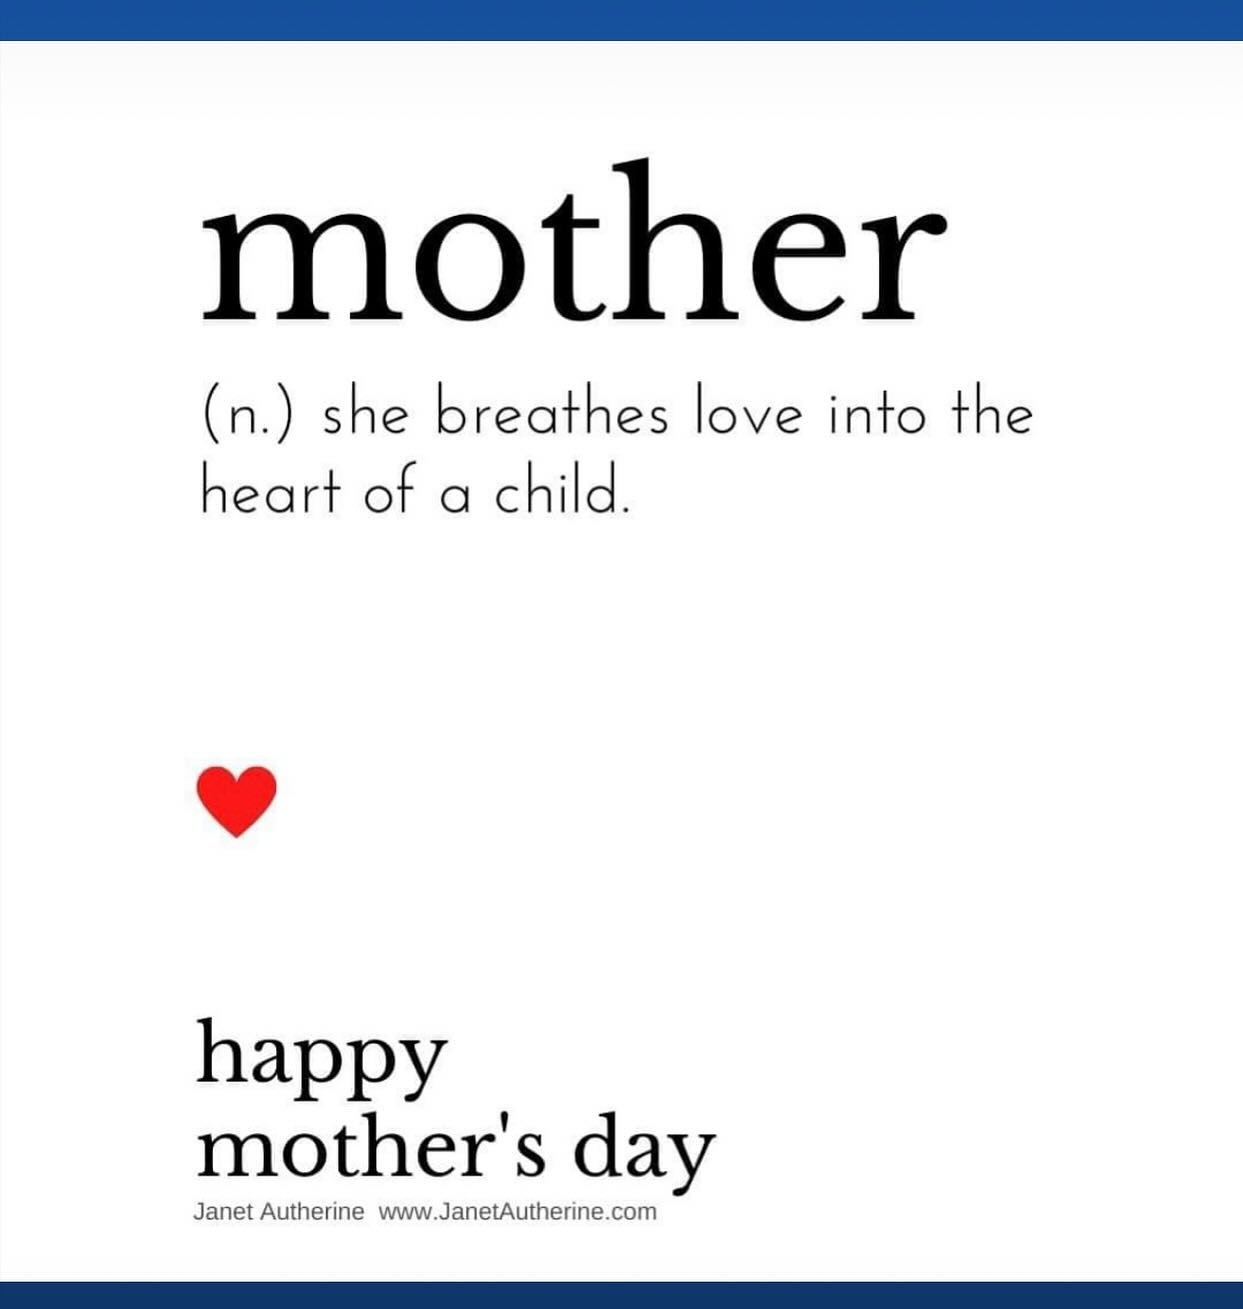 Sending love to all mothers. 💕 Some of us are new mothers. Some of us have children who have gone away to college. Some of us are still in the thick of it, raising young children. And some of us have lost our mothers. Wherever you are on the journey